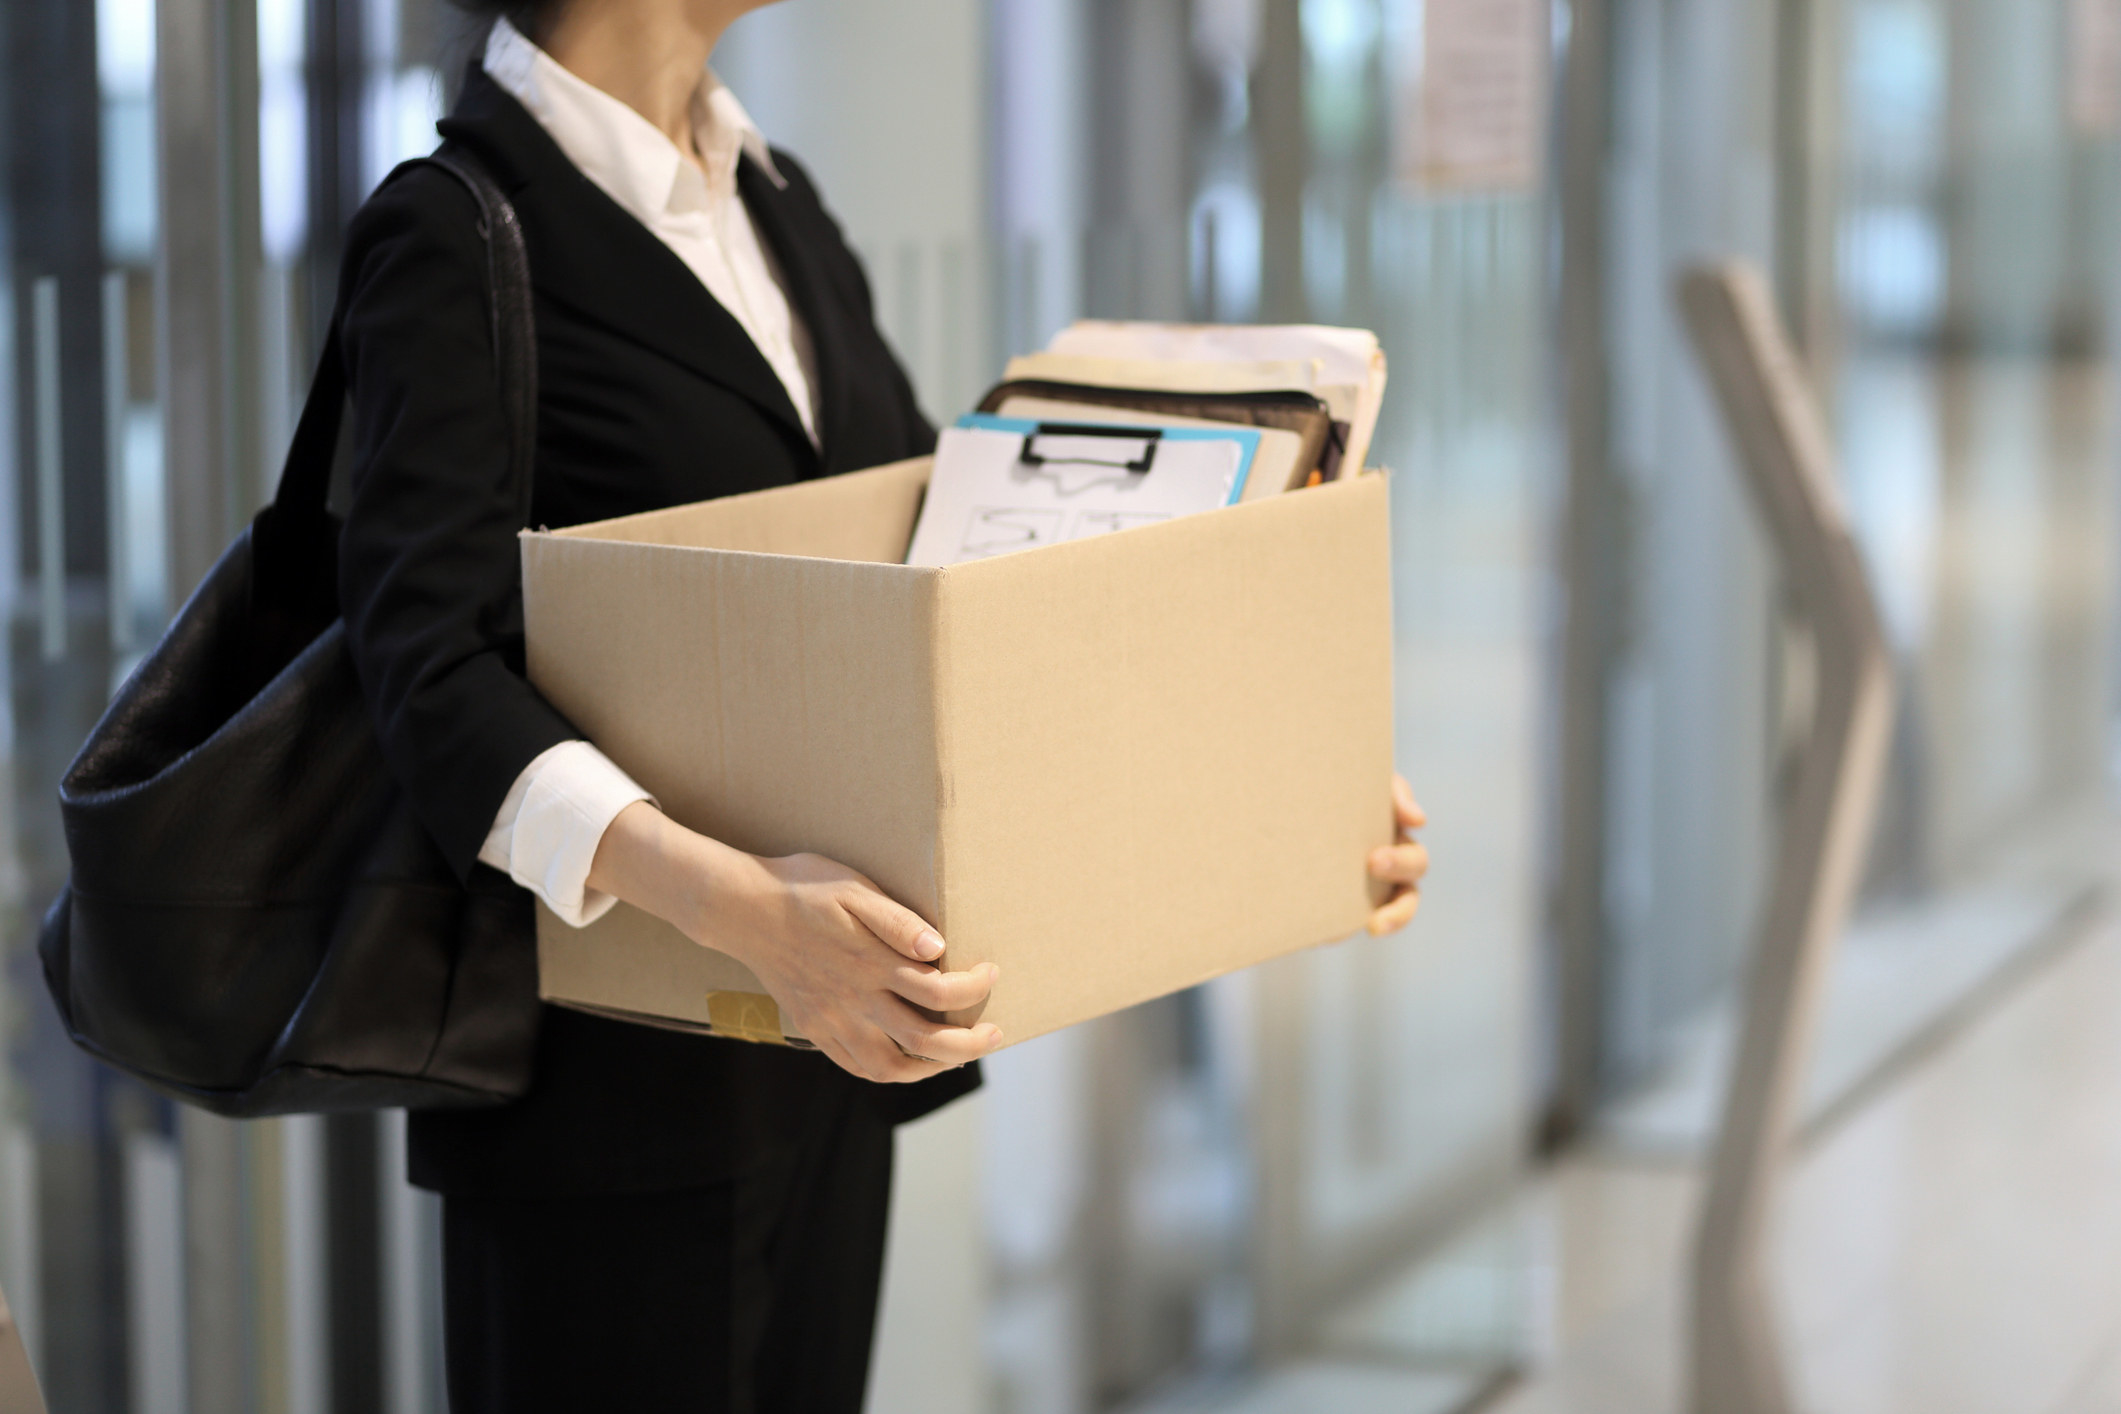 Woman holds workplace belongings in a box